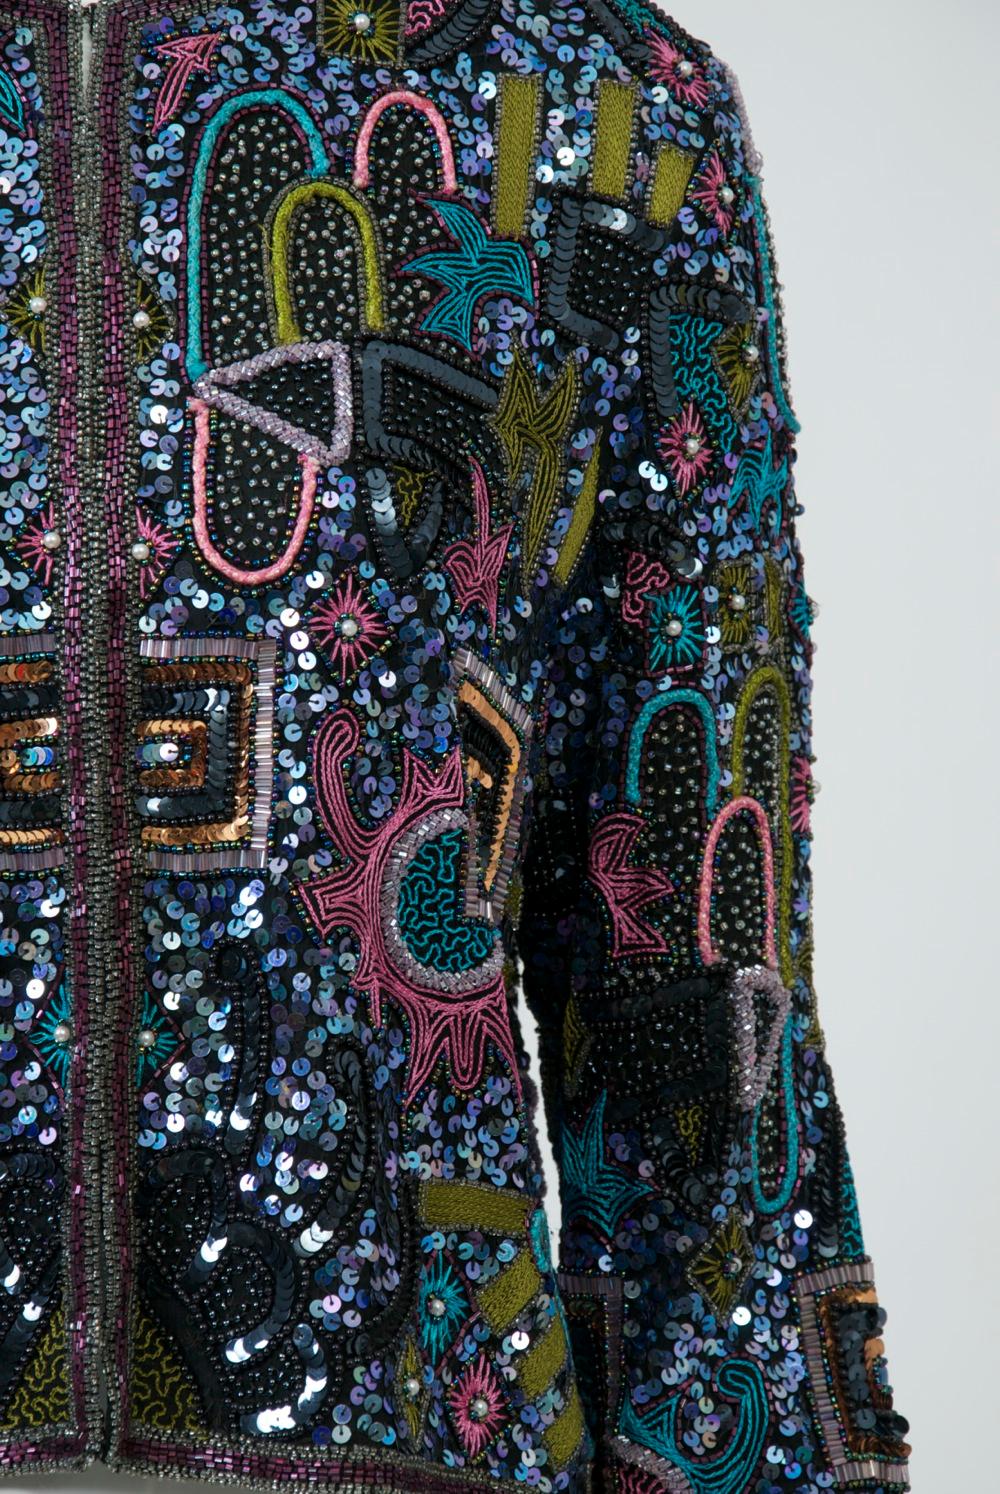 beaded jackets for evening wear